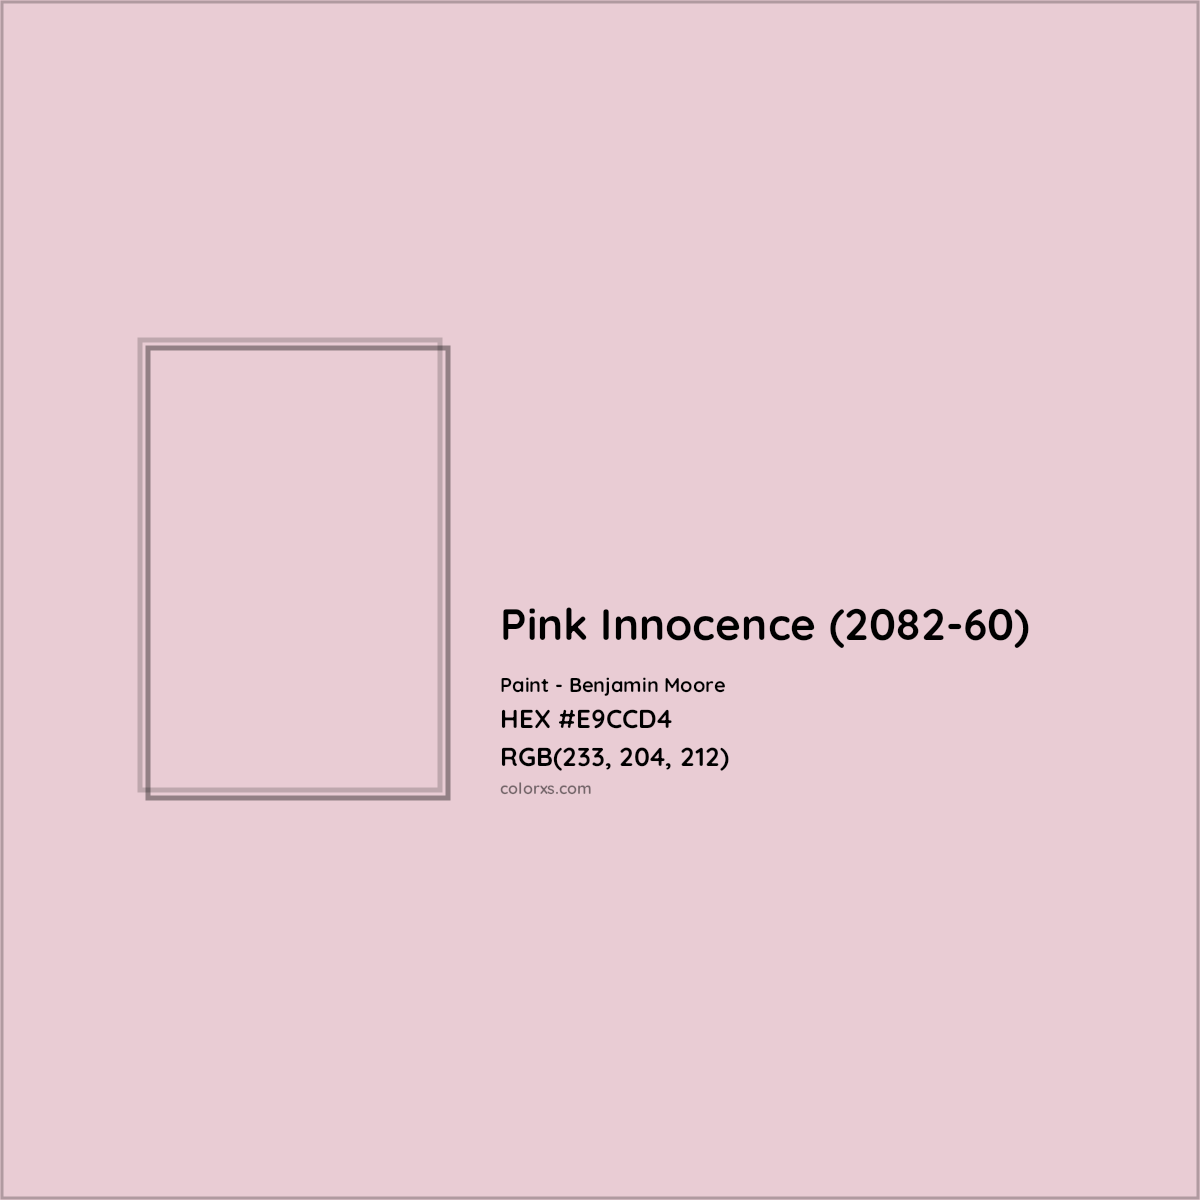 HEX #E9CCD4 Pink Innocence (2082-60) Paint Benjamin Moore - Color Code